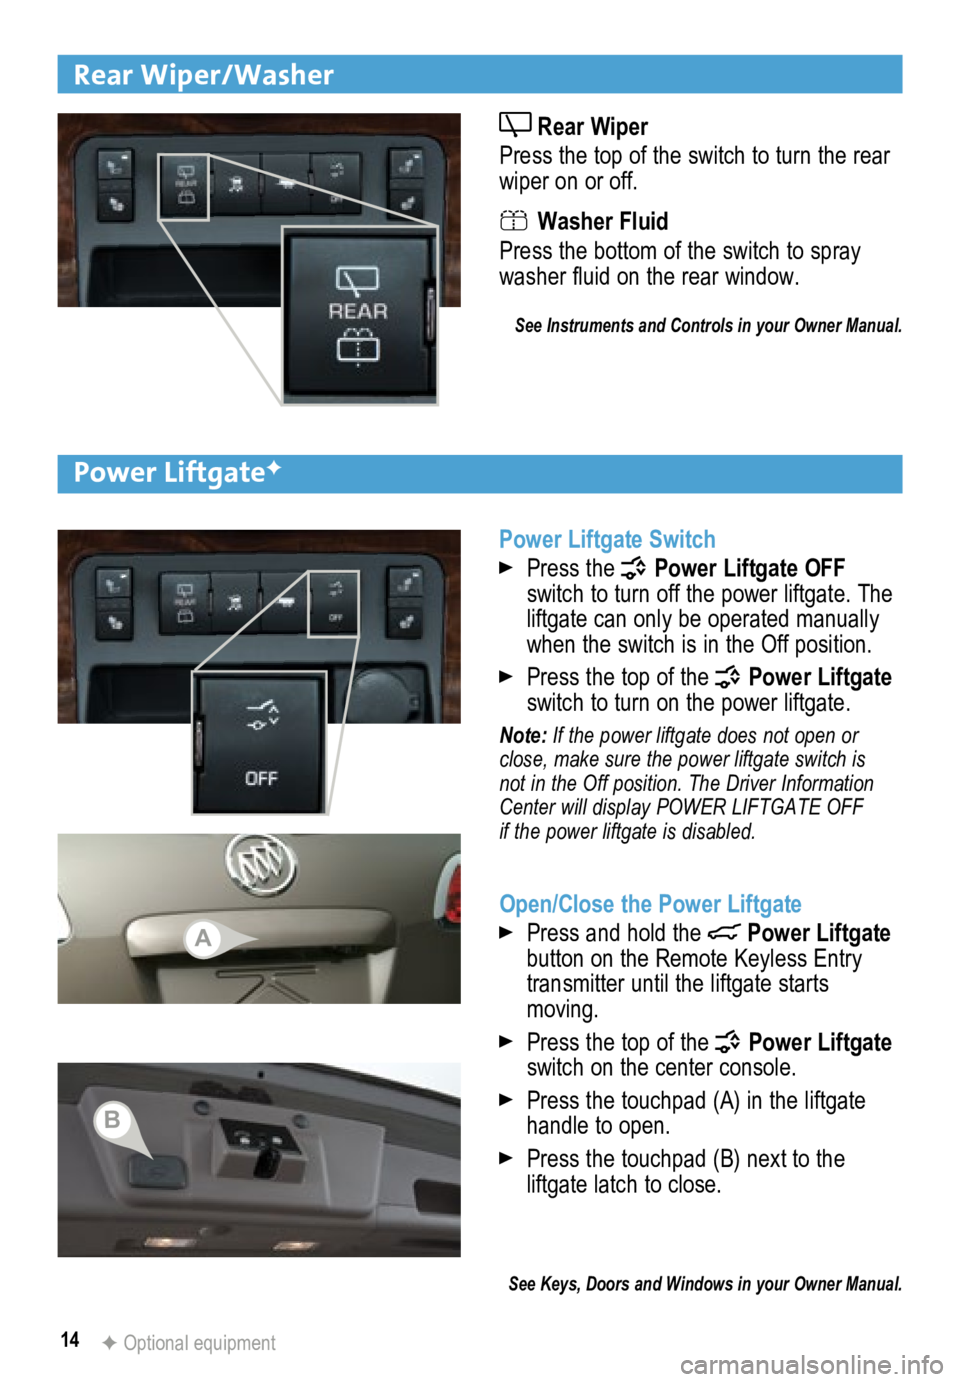 BUICK ENCLAVE 2015  Get To Know Guide 14
Rear Wiper/Washer
 Rear Wiper 
Press the top of the switch to turn the rear 
wiper on or off.
 Washer Fluid 
Press the bottom of the switch to spray 
washer fluid on the rear window. 
See Instrumen